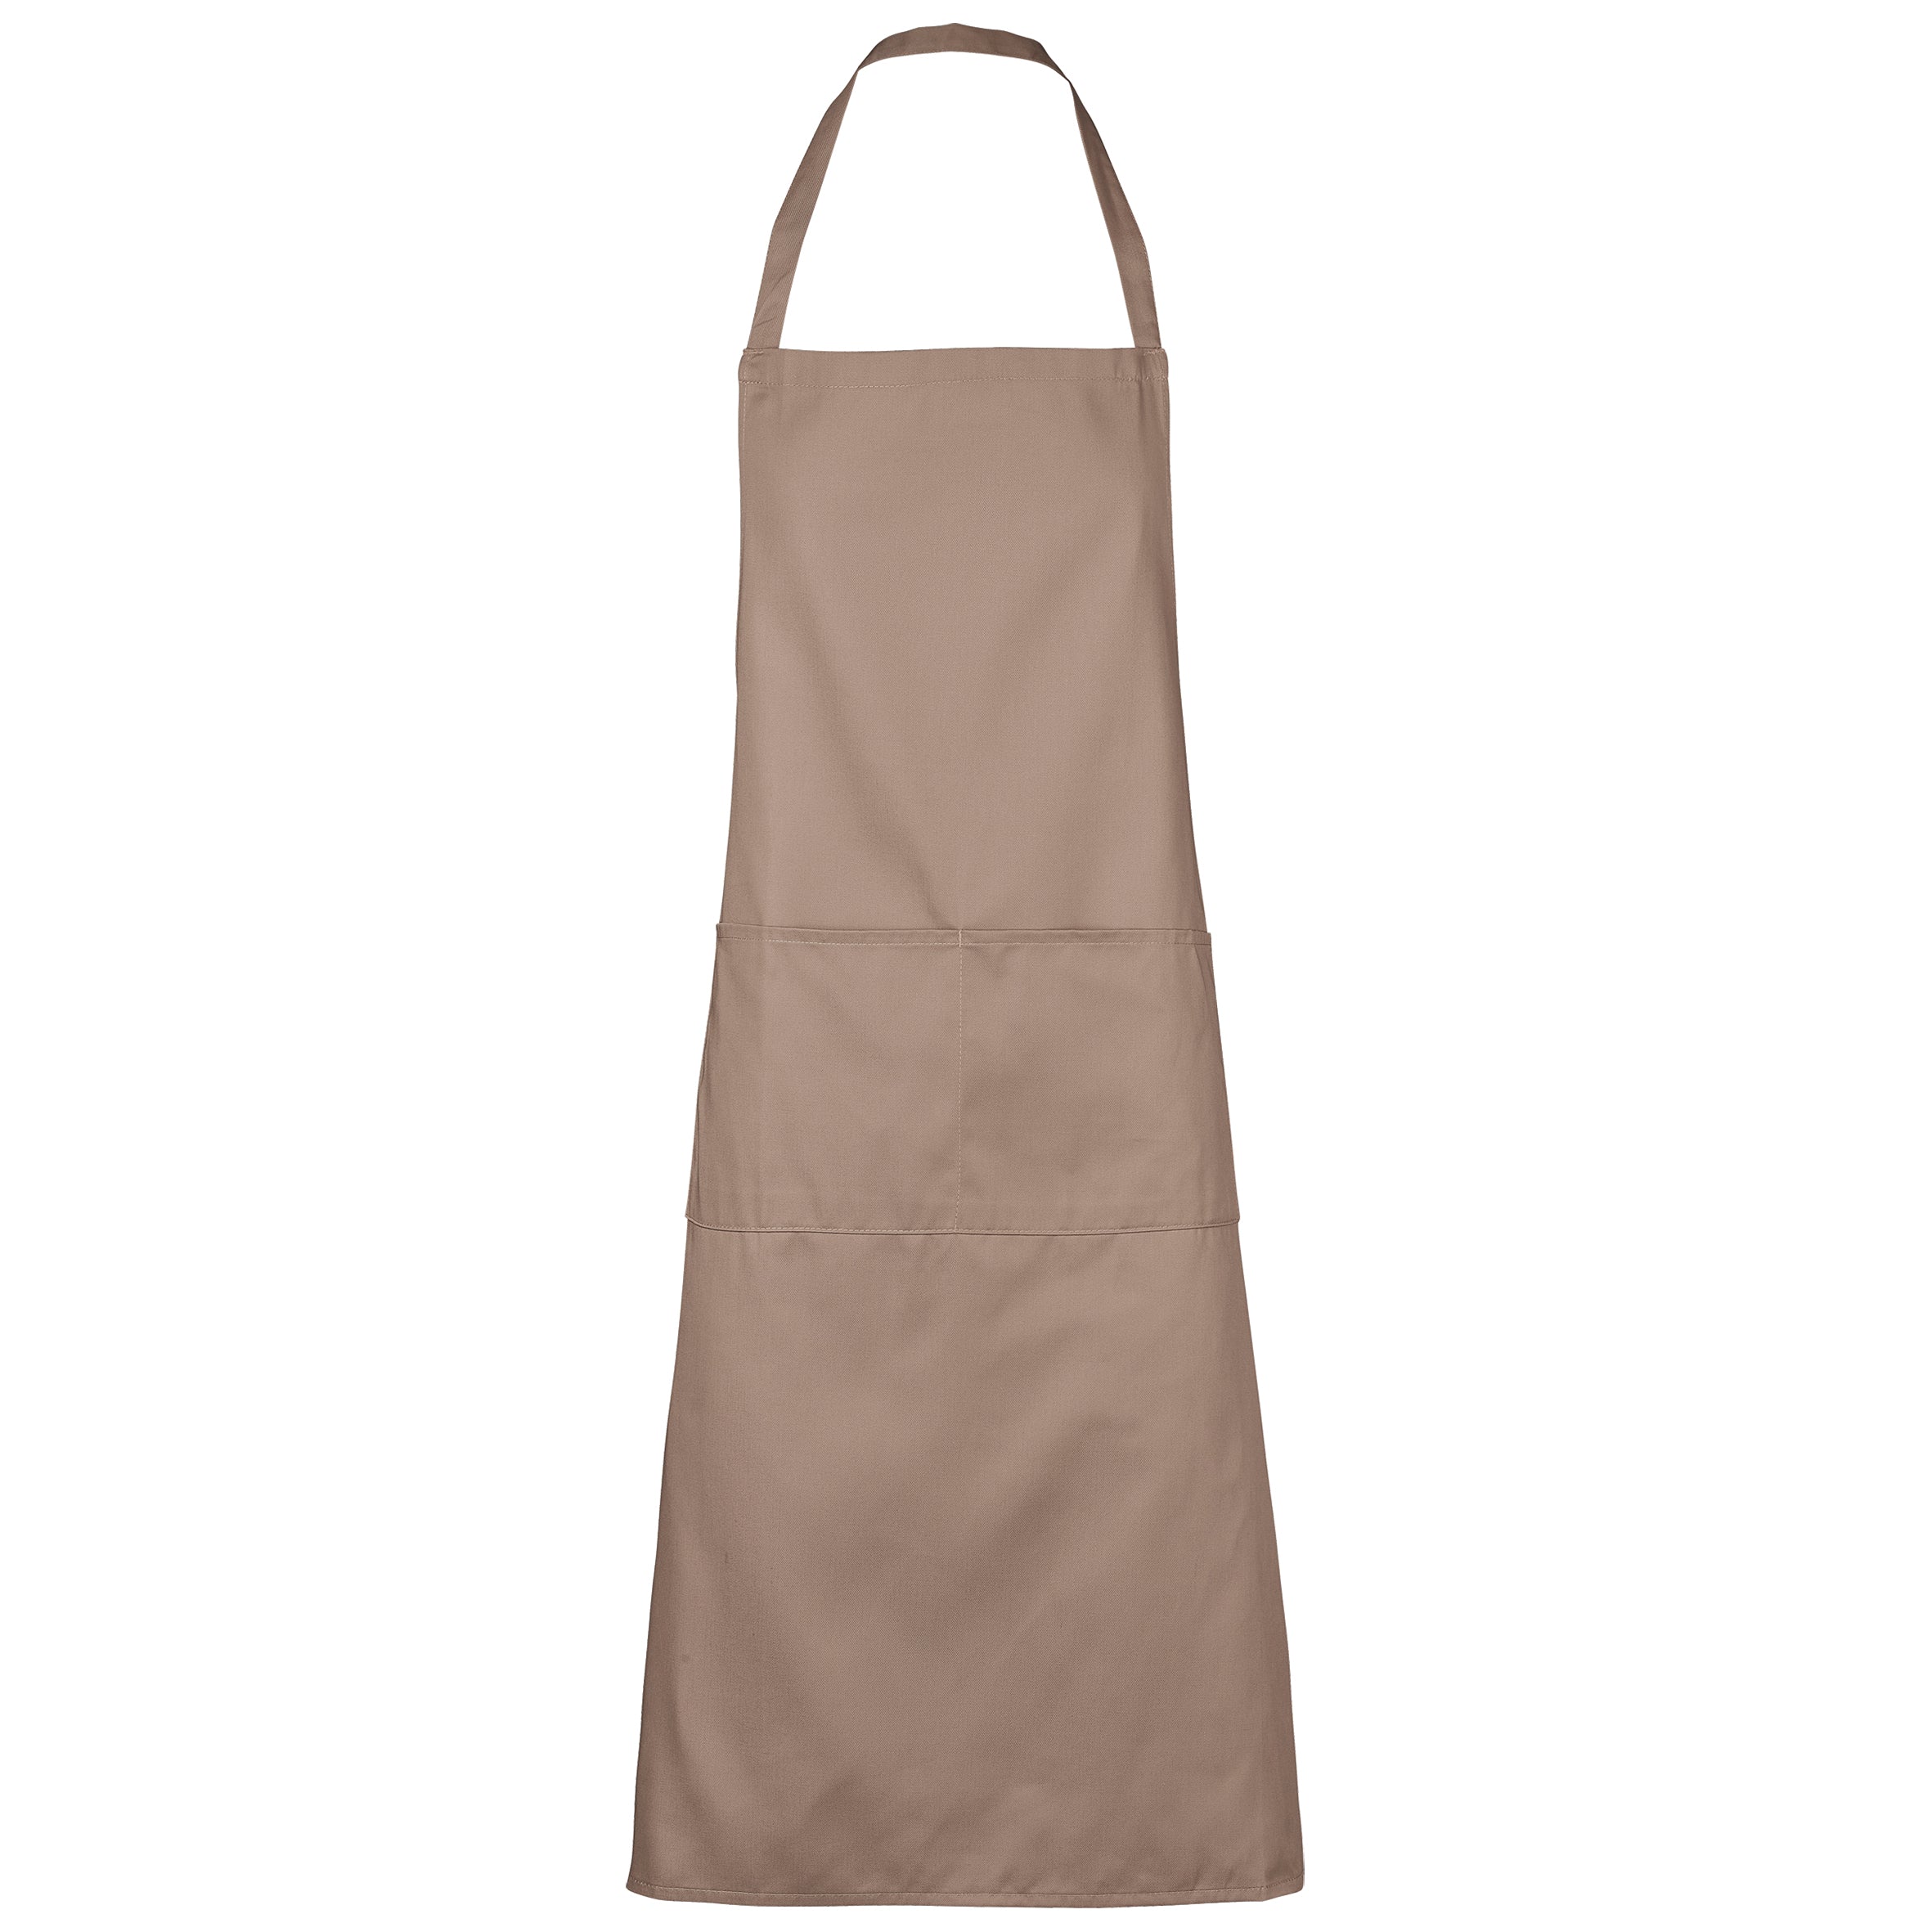 Unisex Cooking / Service Industry Apron